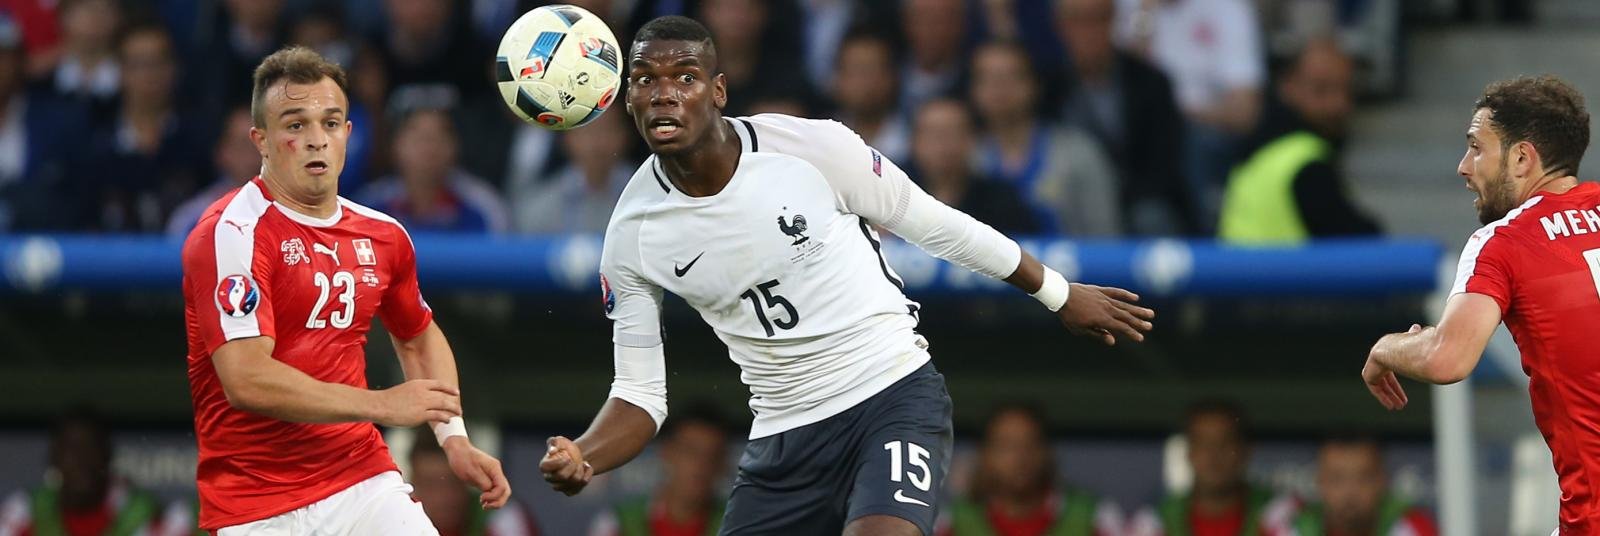 Manchester United re-sign Paul Pogba in world record £100m deal